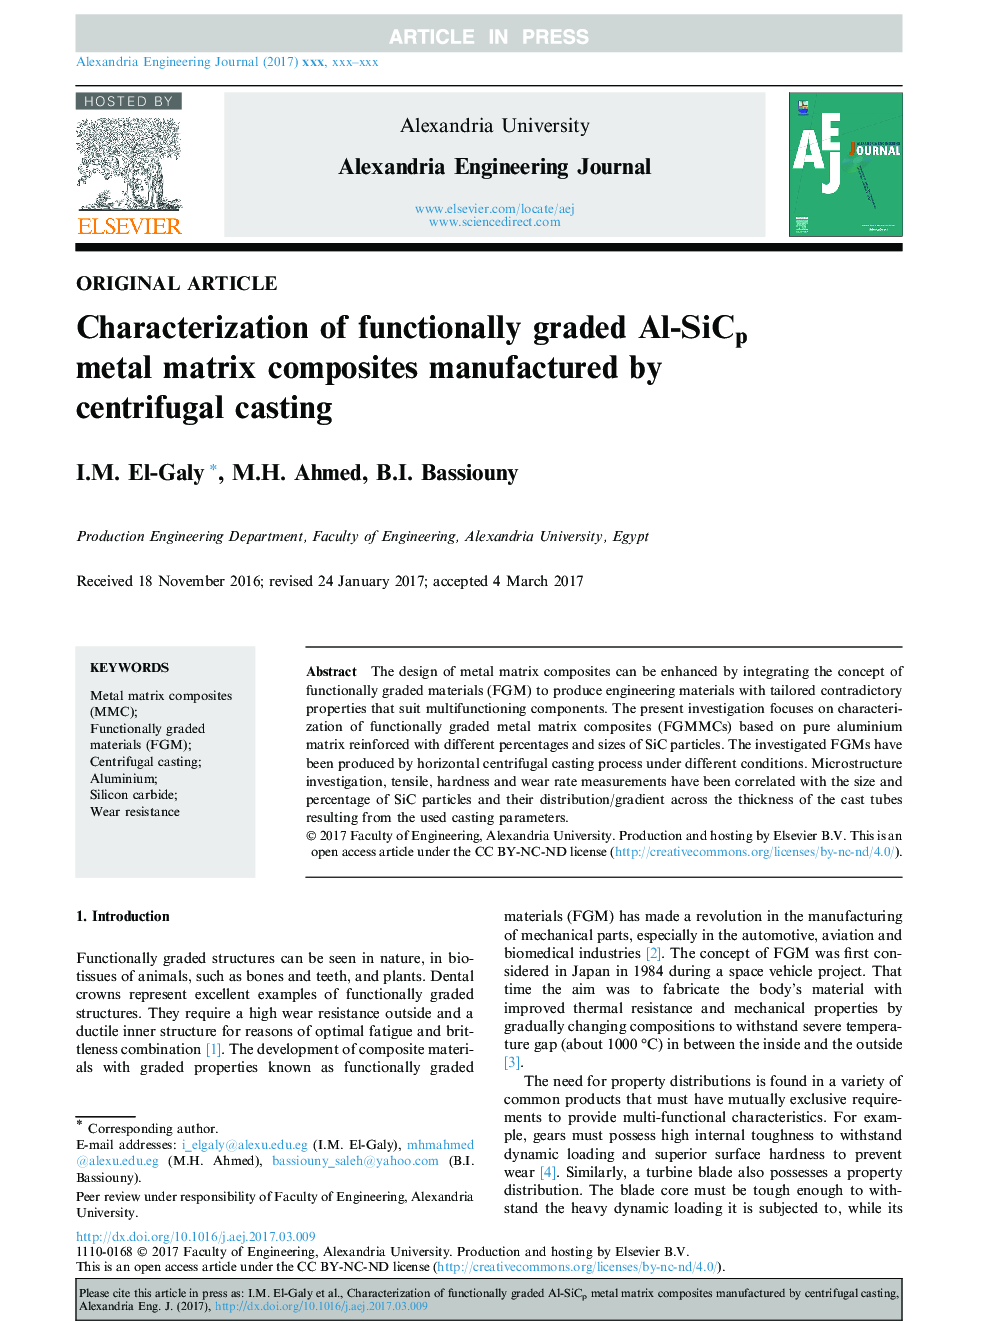 Characterization of functionally graded Al-SiCp metal matrix composites manufactured by centrifugal casting